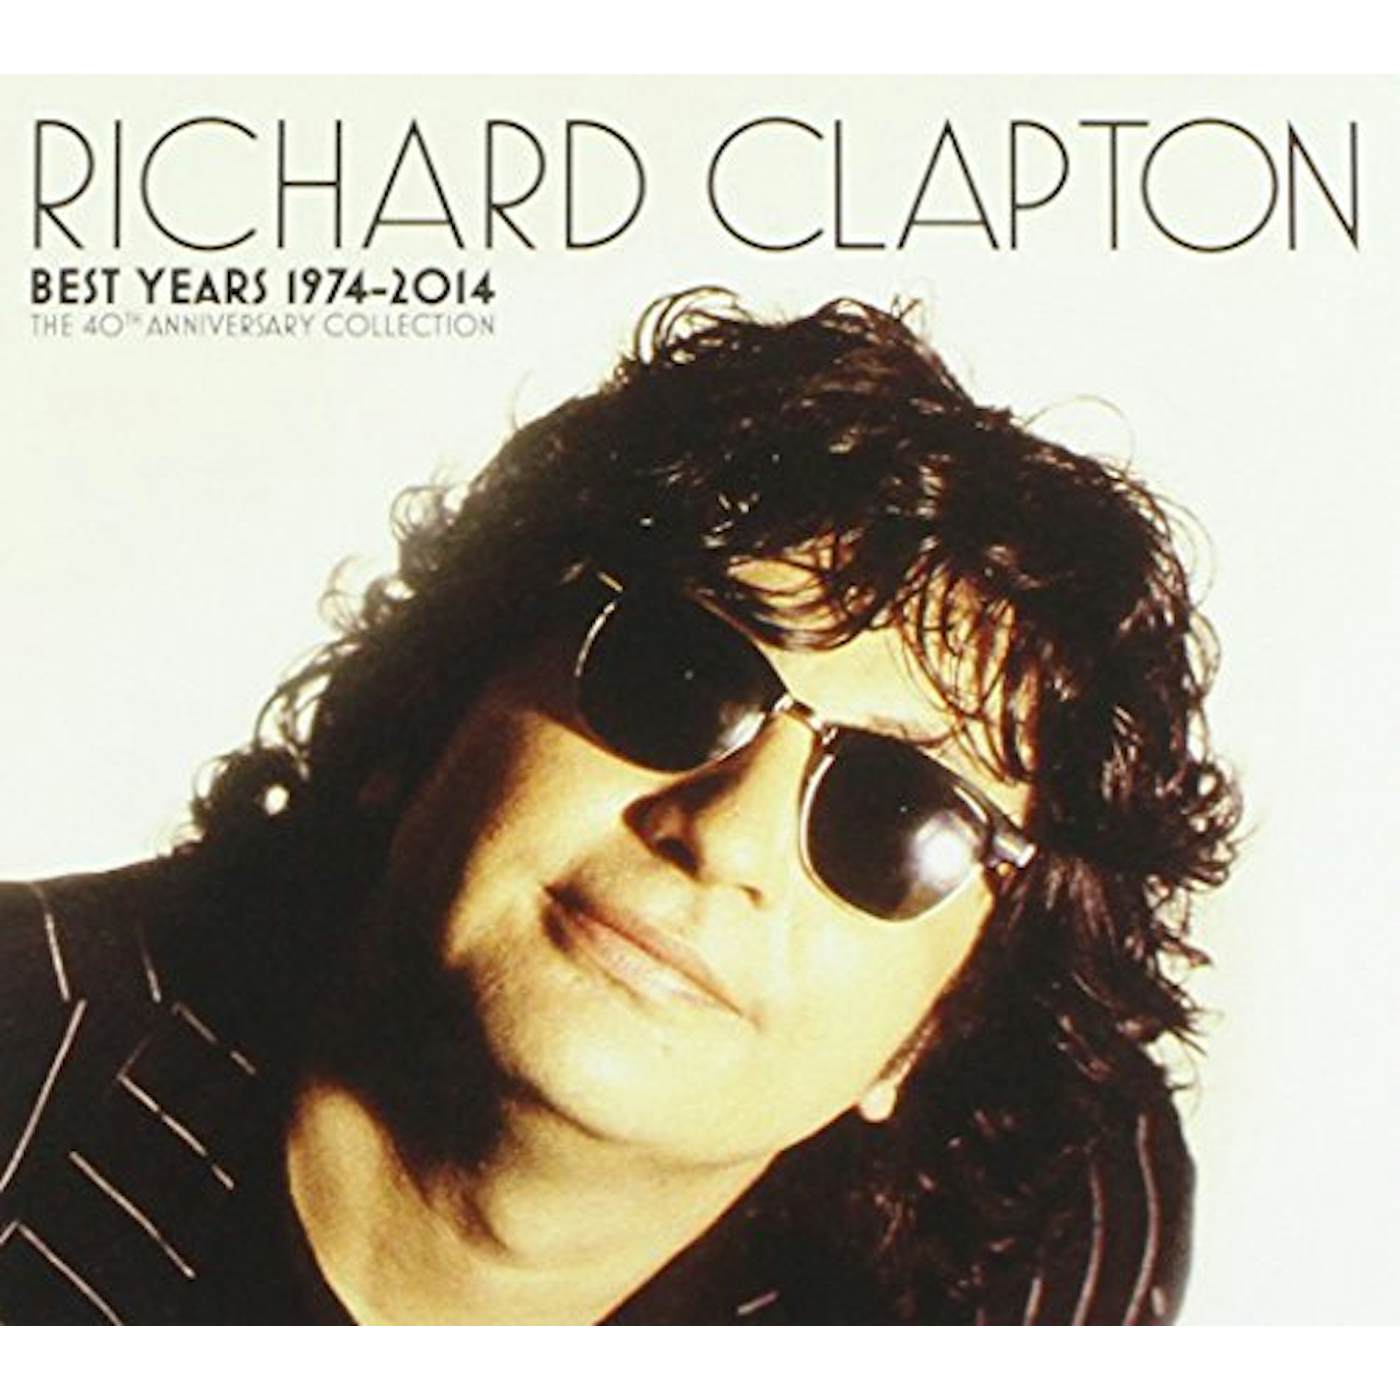 Richard Clapton BEST YEARS 1974-14/THE 40TH ANNIVERSARY COLLECTION CD